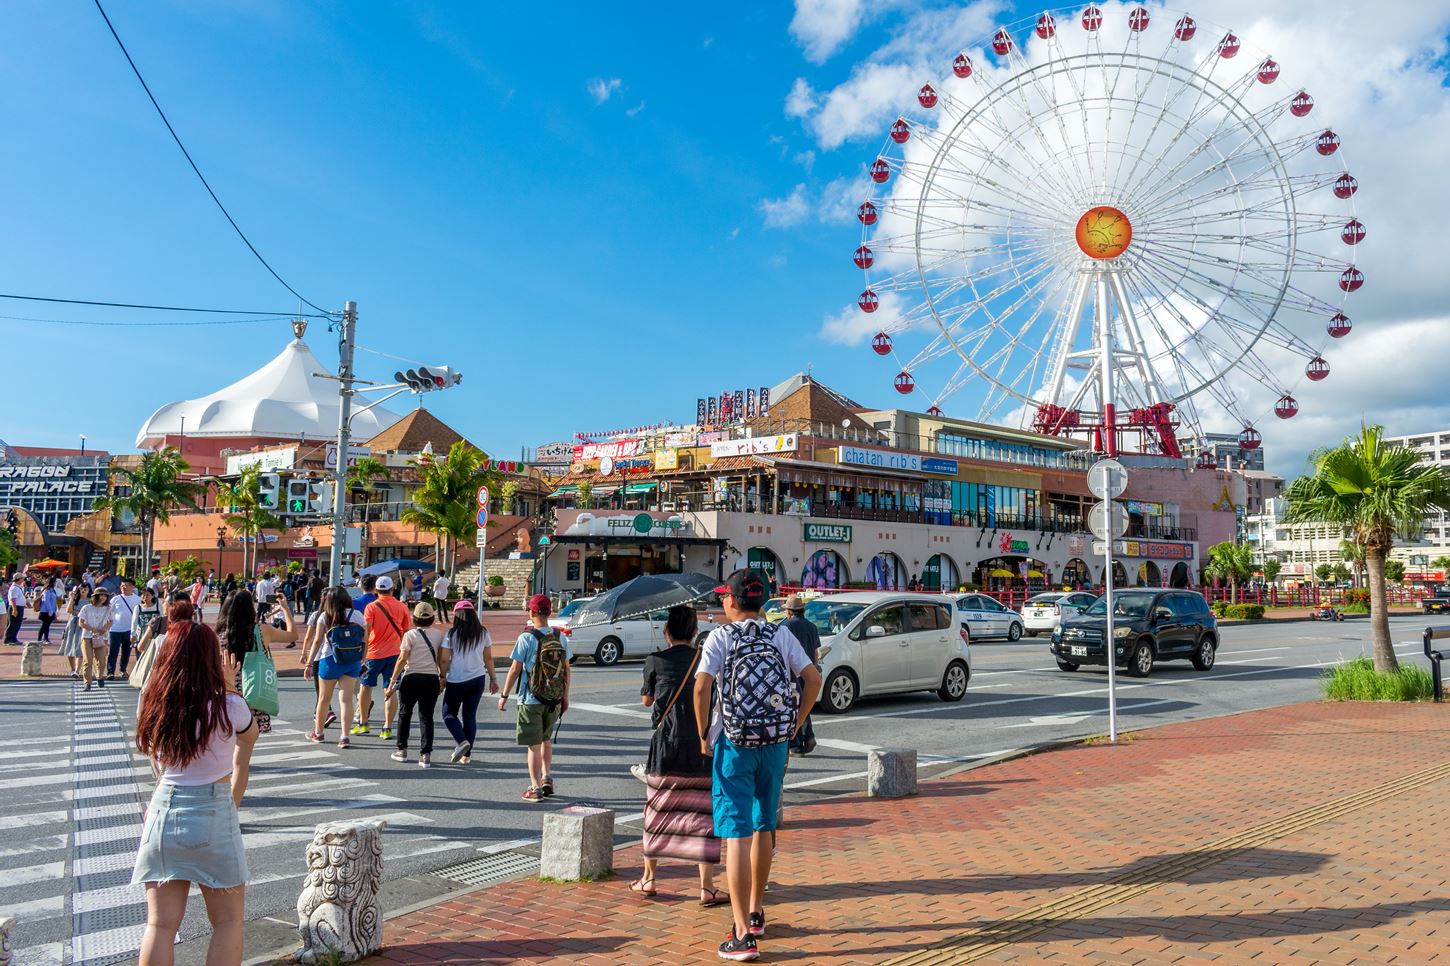 Sightseeing scenery that simply shows the weather and clothes in Okinawa in July2